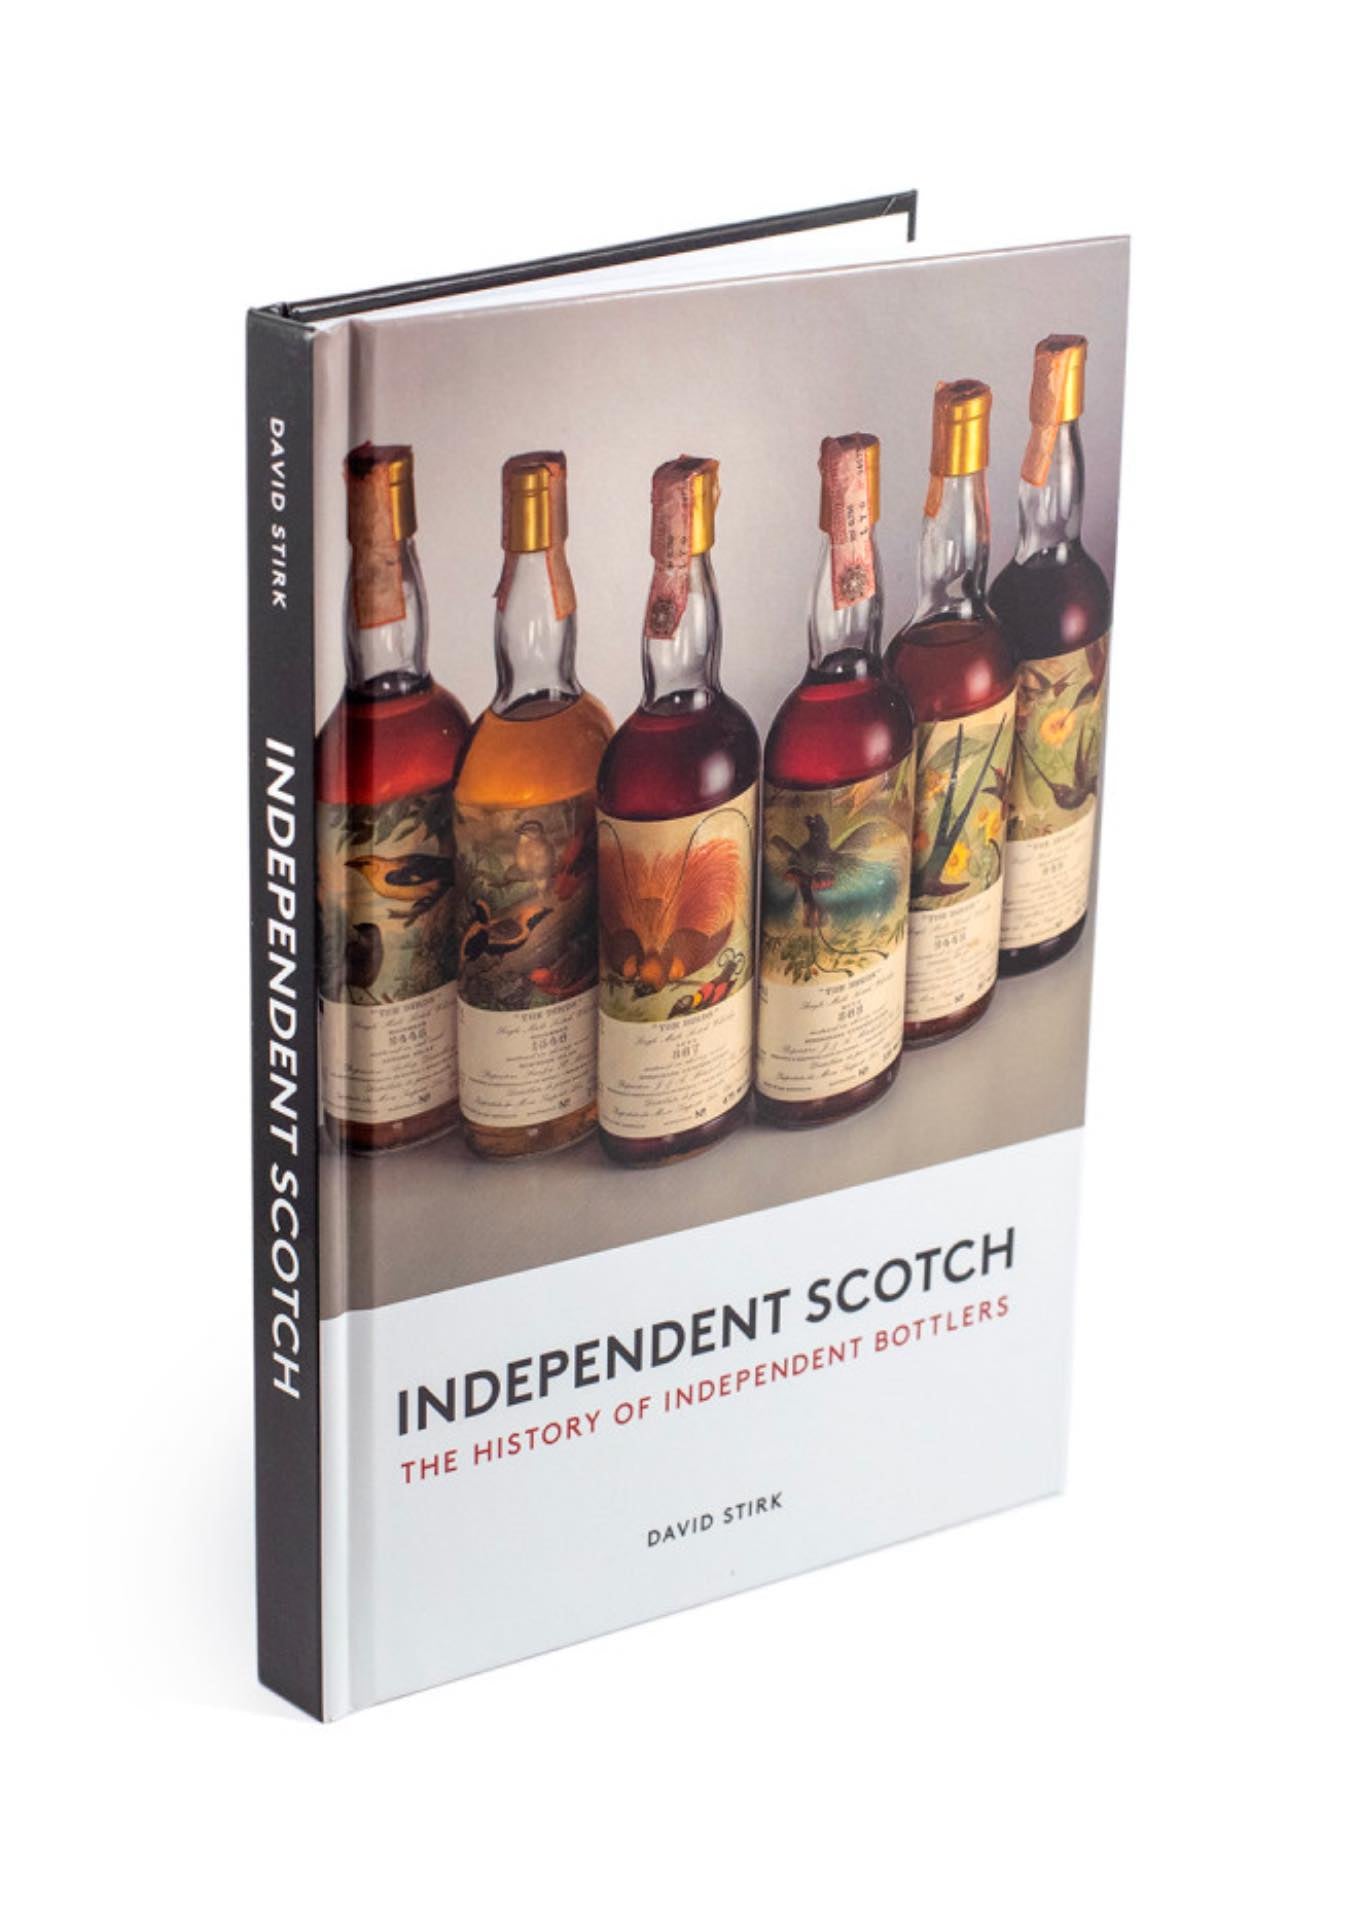 Independent Scotch, History of Independent Bottlers, by David Stirk